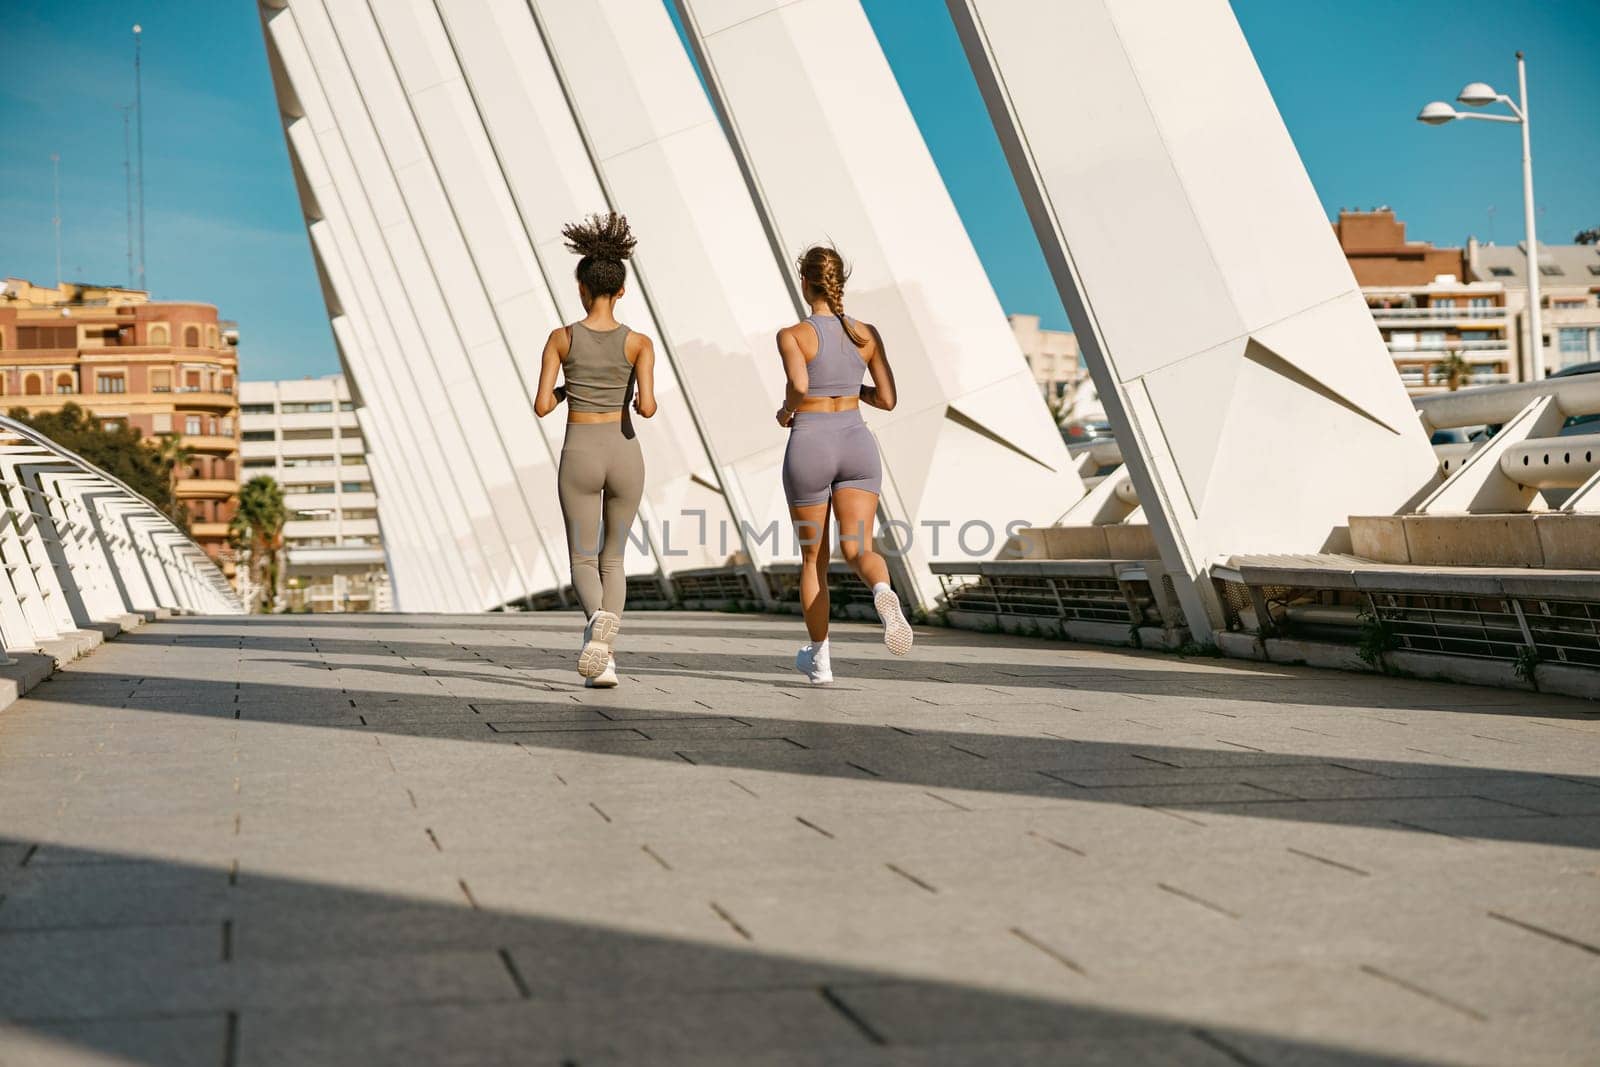 Back view of two women athlete running side by side along an outdoor track on buildings background by Yaroslav_astakhov